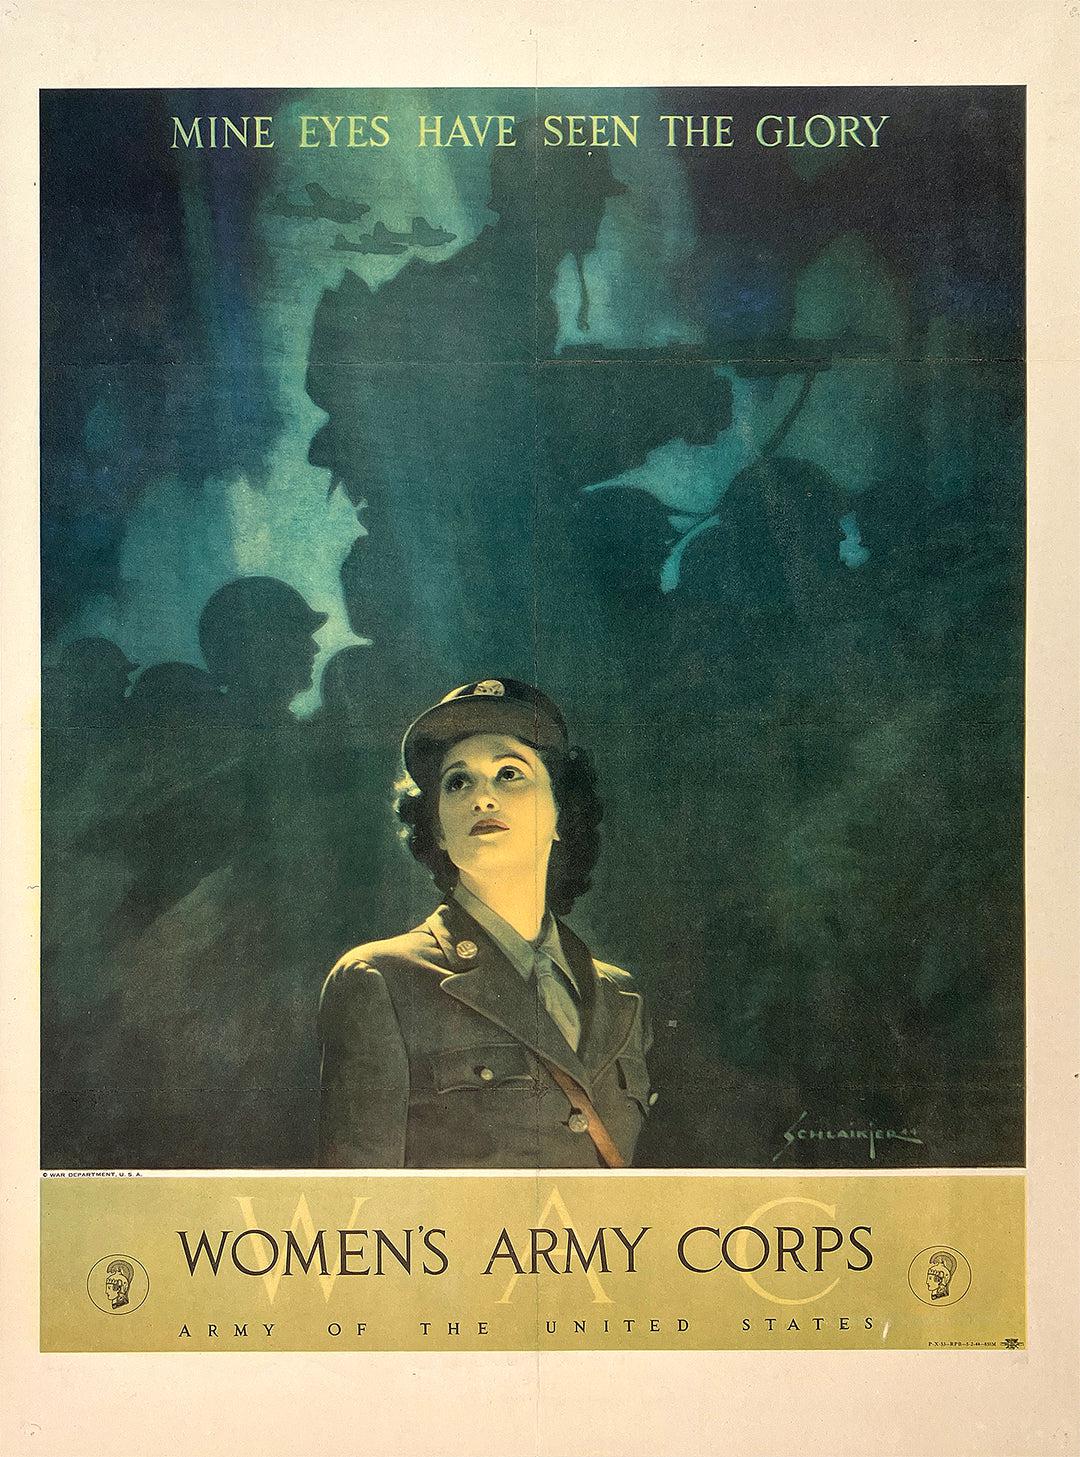 Original Vintage WWII Poster Women's Army Corps Mine Eyes by Schlaikjer 1944